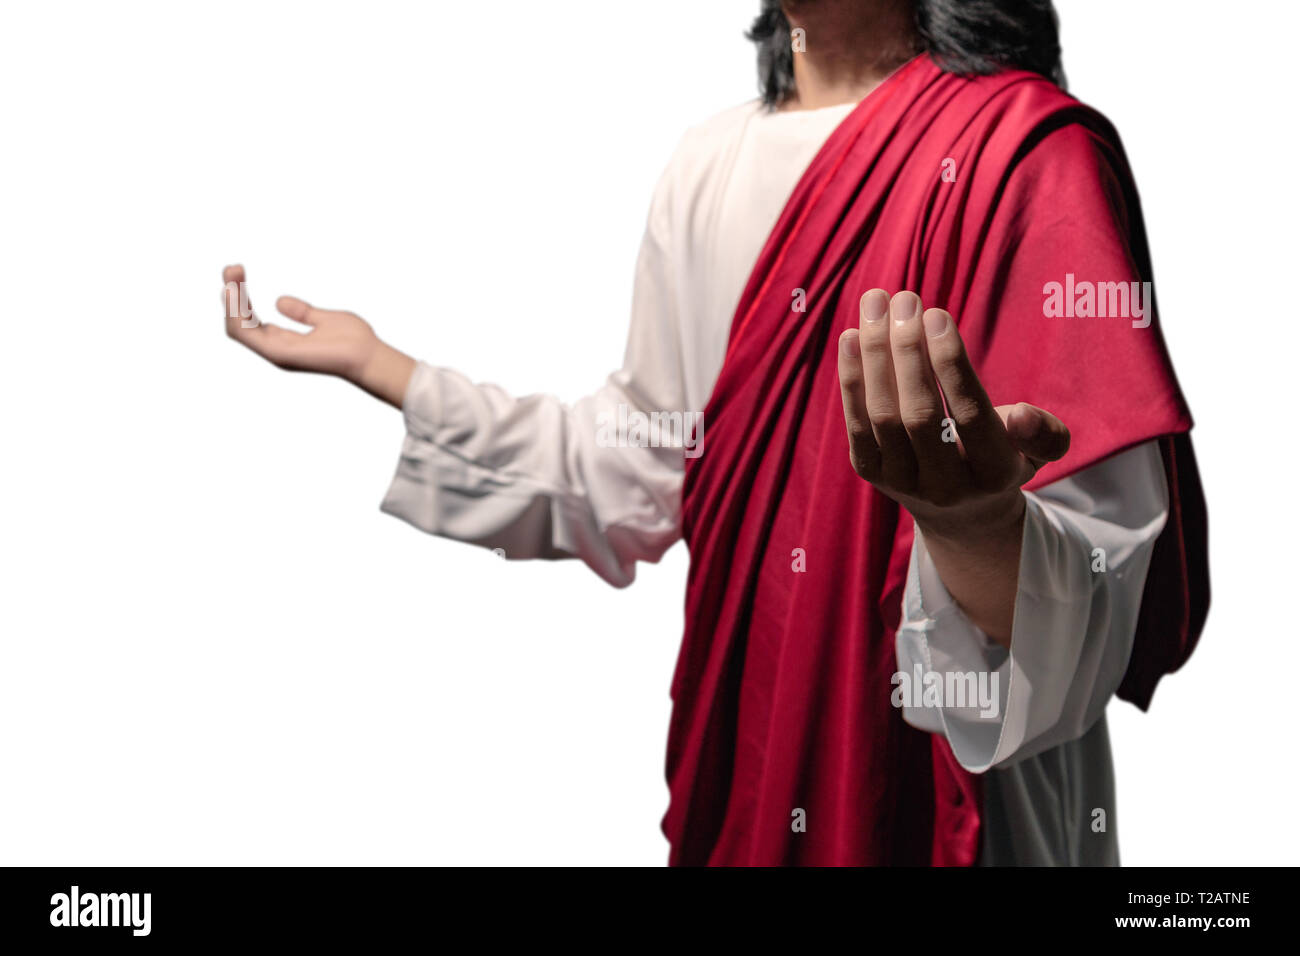 Jesus christ raised hands with open palms and praying to god posing isolated over white background Stock Photo